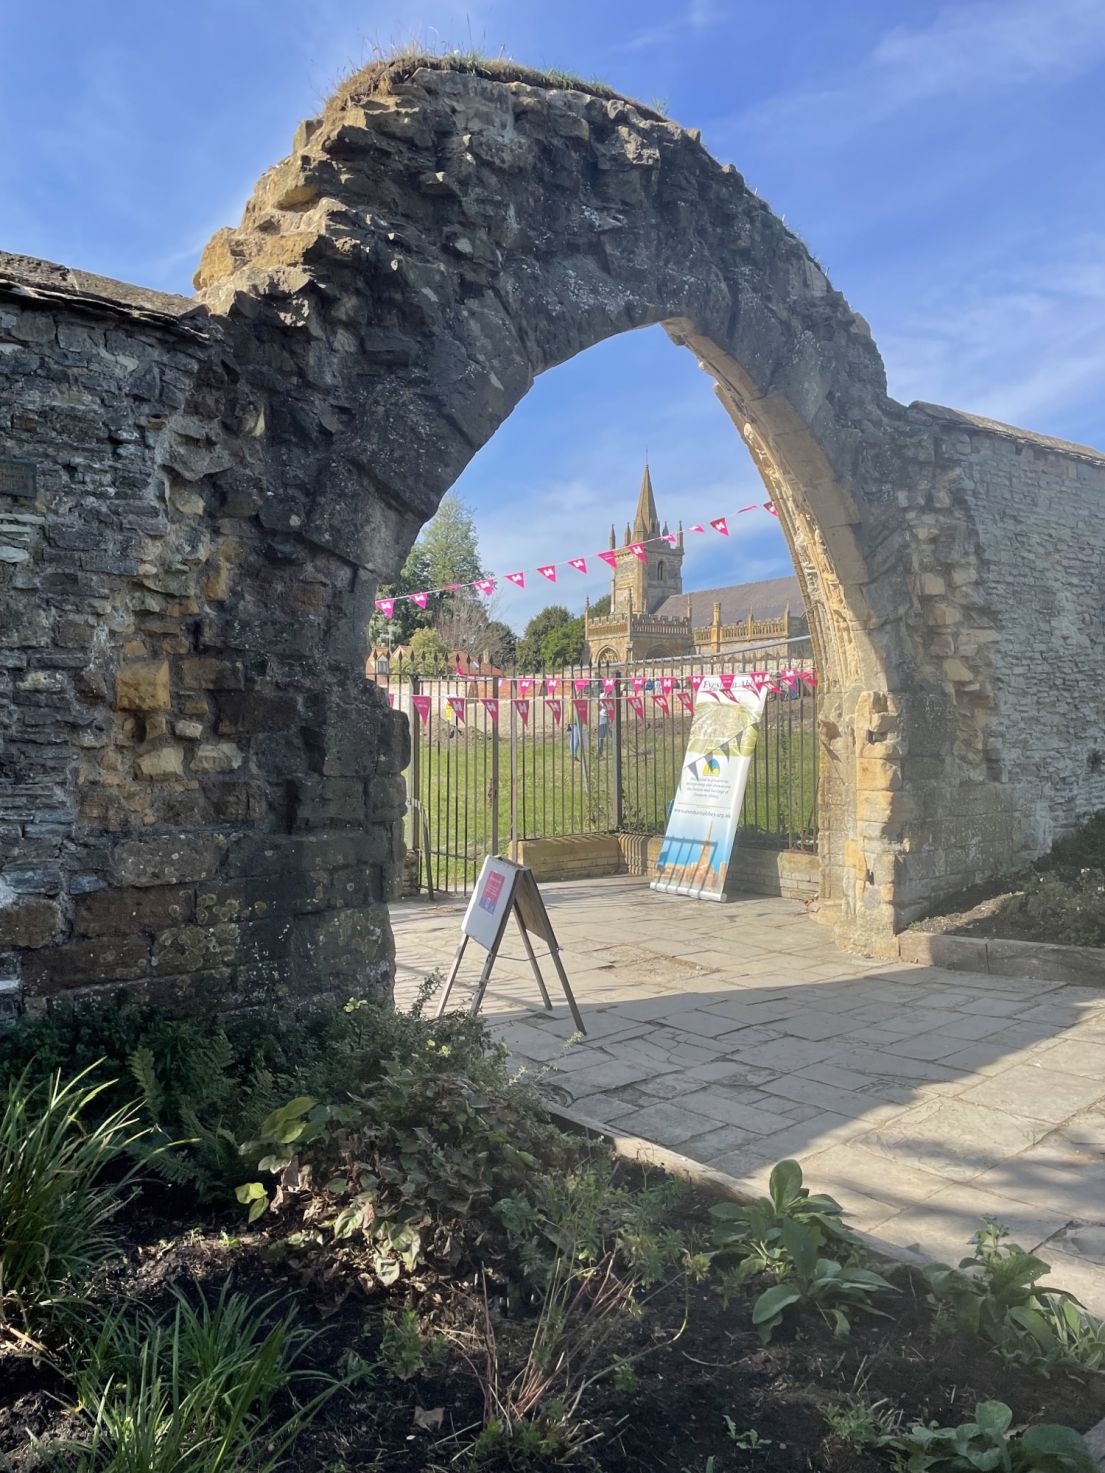 A medieval stone arch, which through can be seen a Abbey, with gardens adorned with pink 'HODs' bunting.